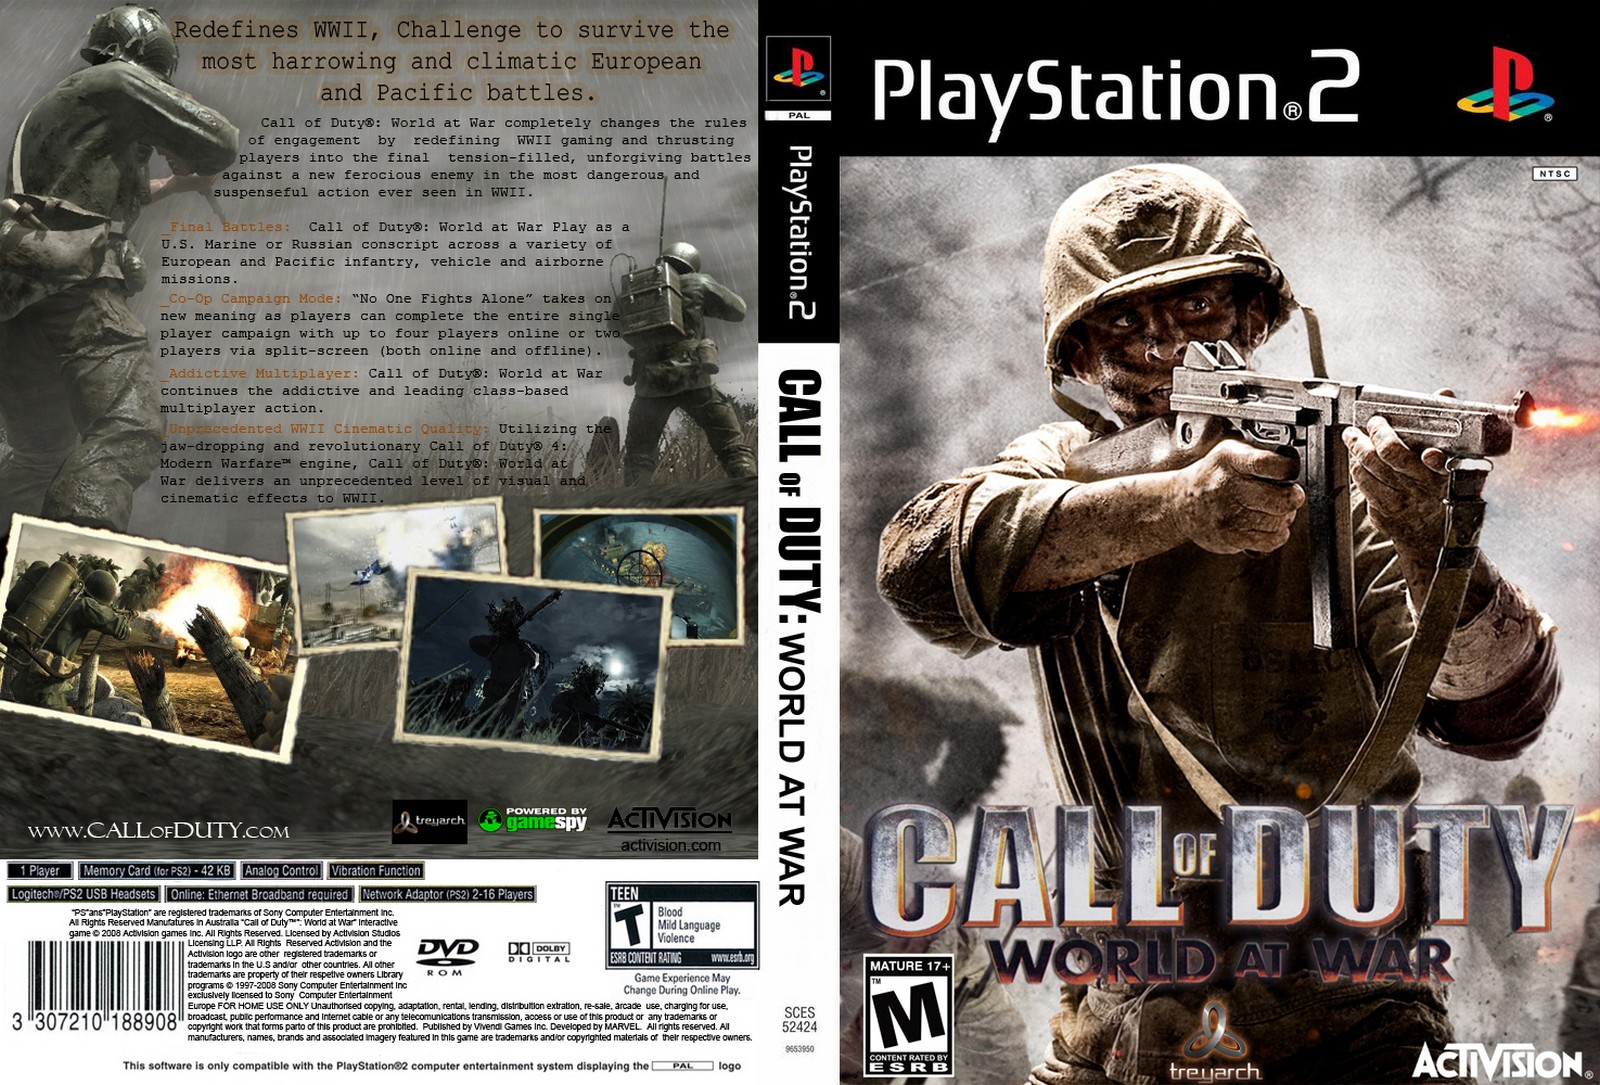 Диск игры call of duty. Call of Duty PLAYSTATION 2. Диск Call of Duty PS 2. Диск игра Call of Duty 3 PS 2. Call of Duty 1 обложка диска.